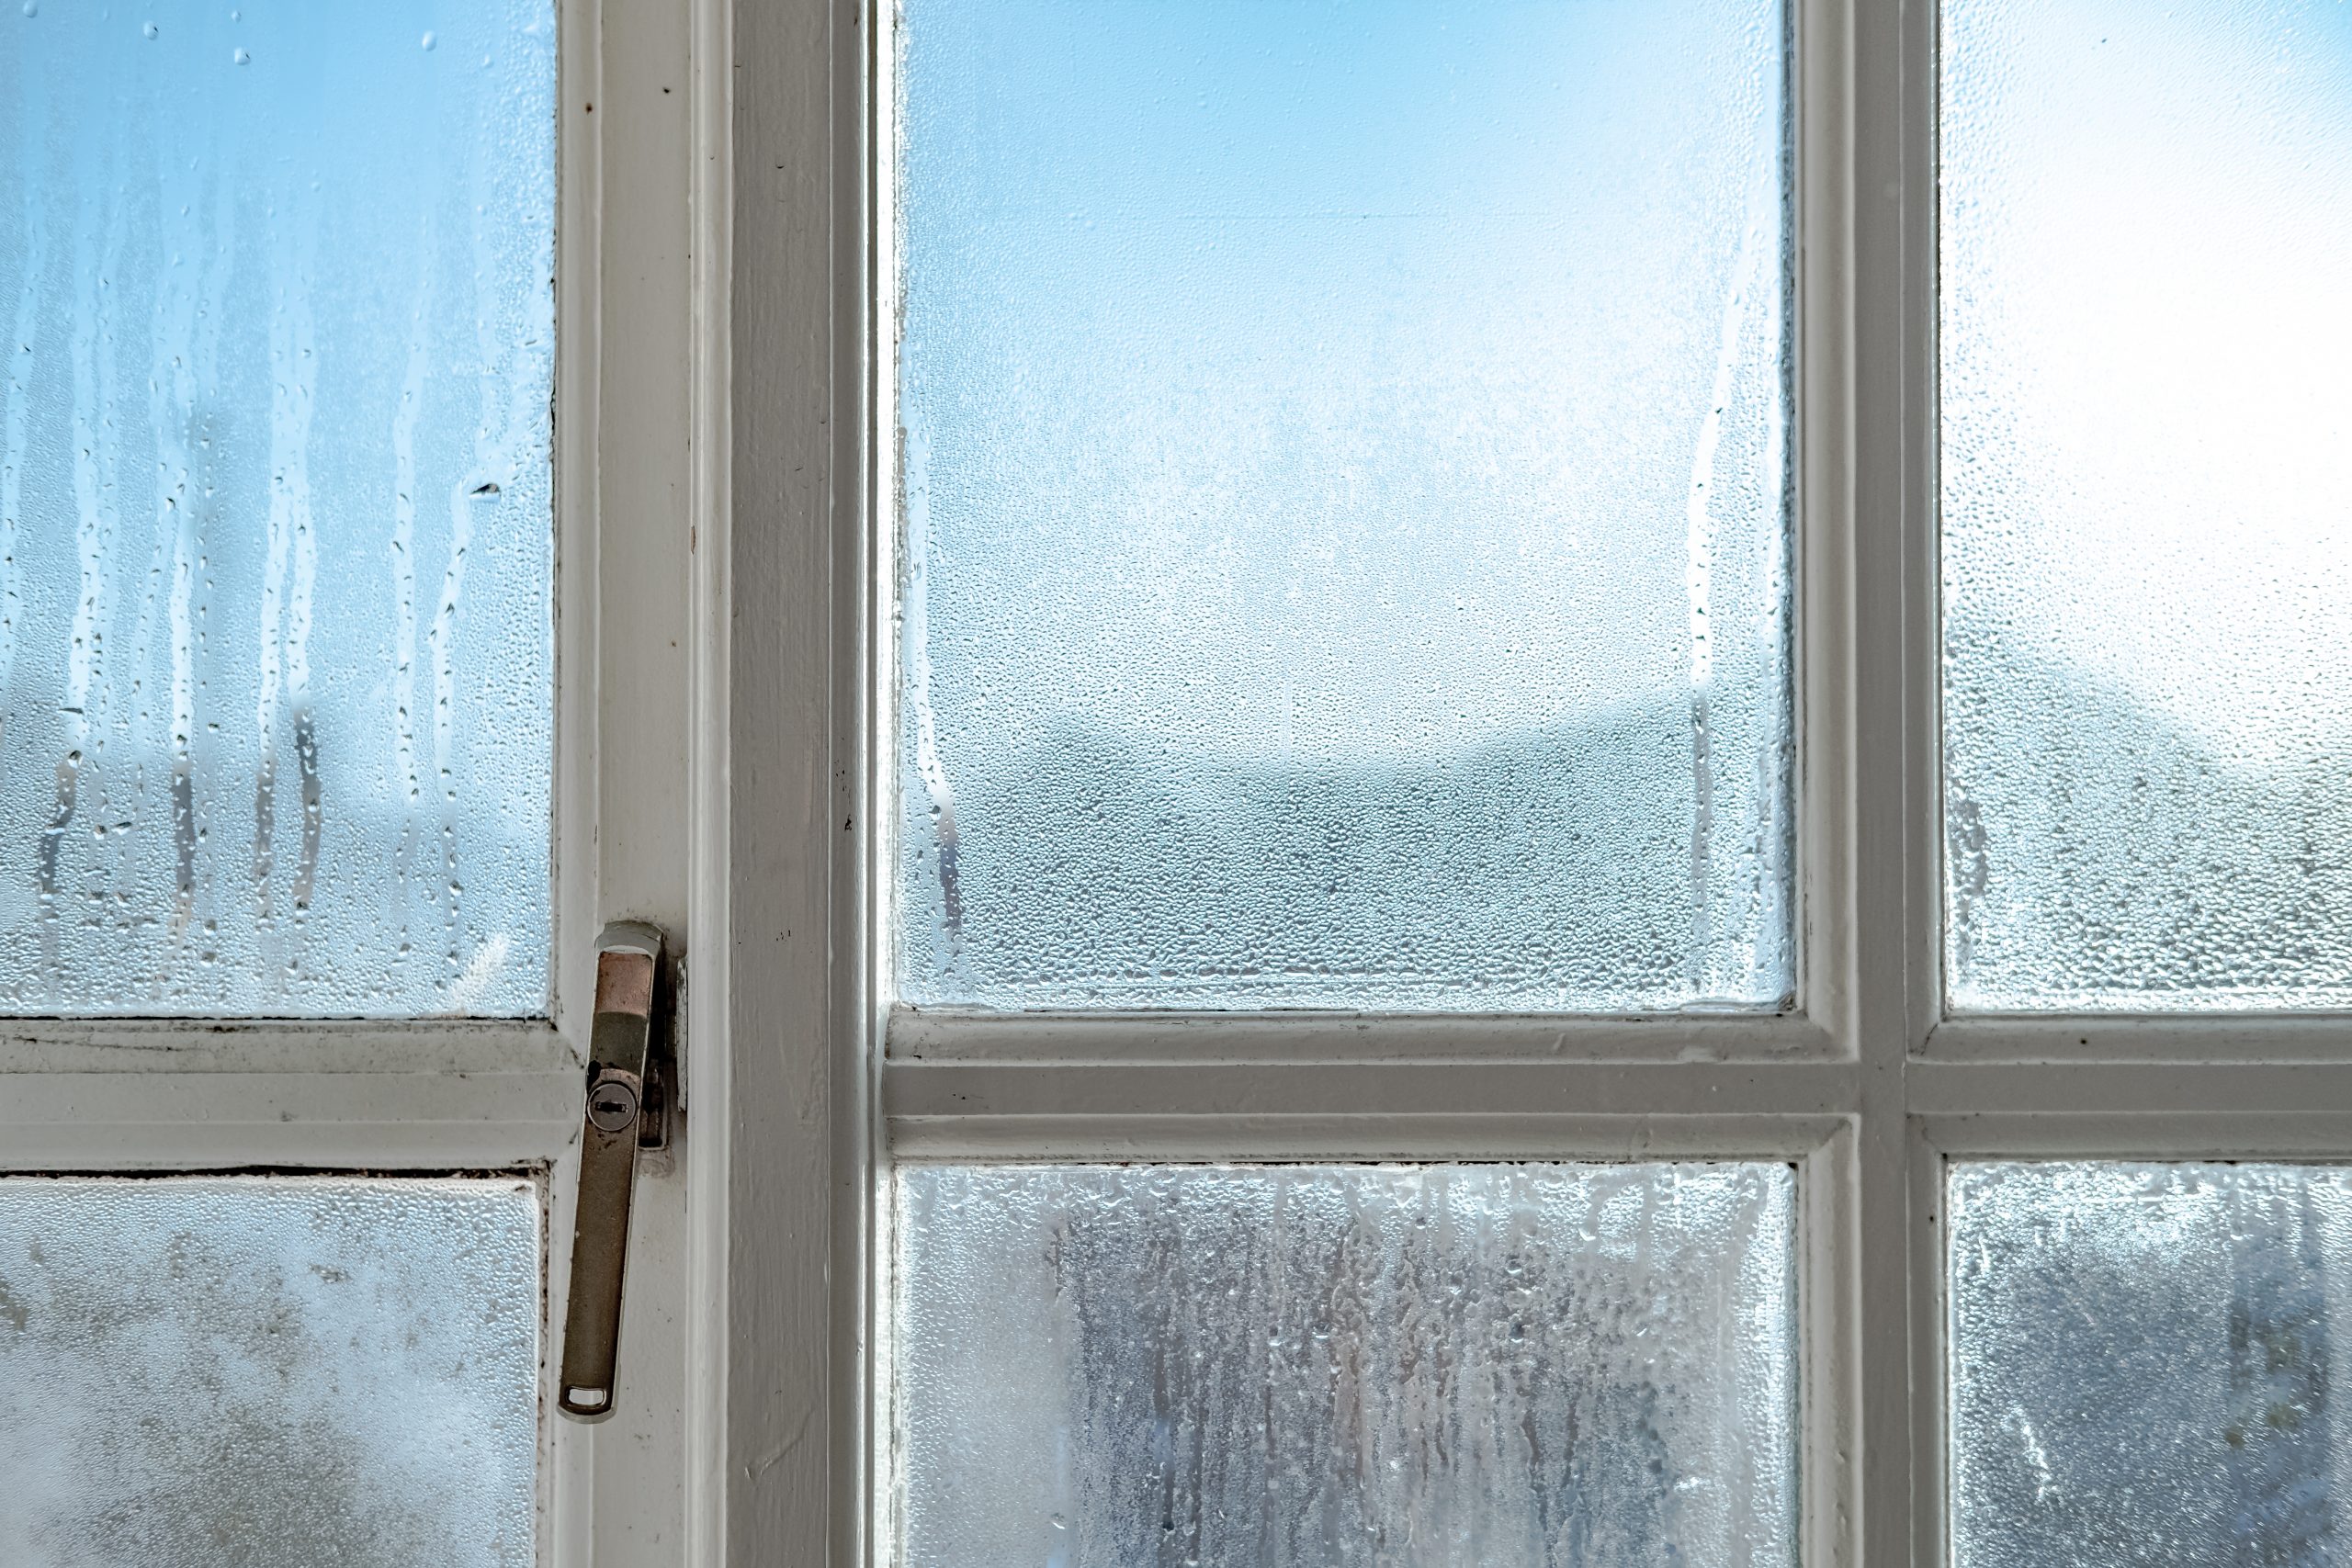 ‘No gadgets needed!’ Banish condensation on windows and stop black mould for less than £2